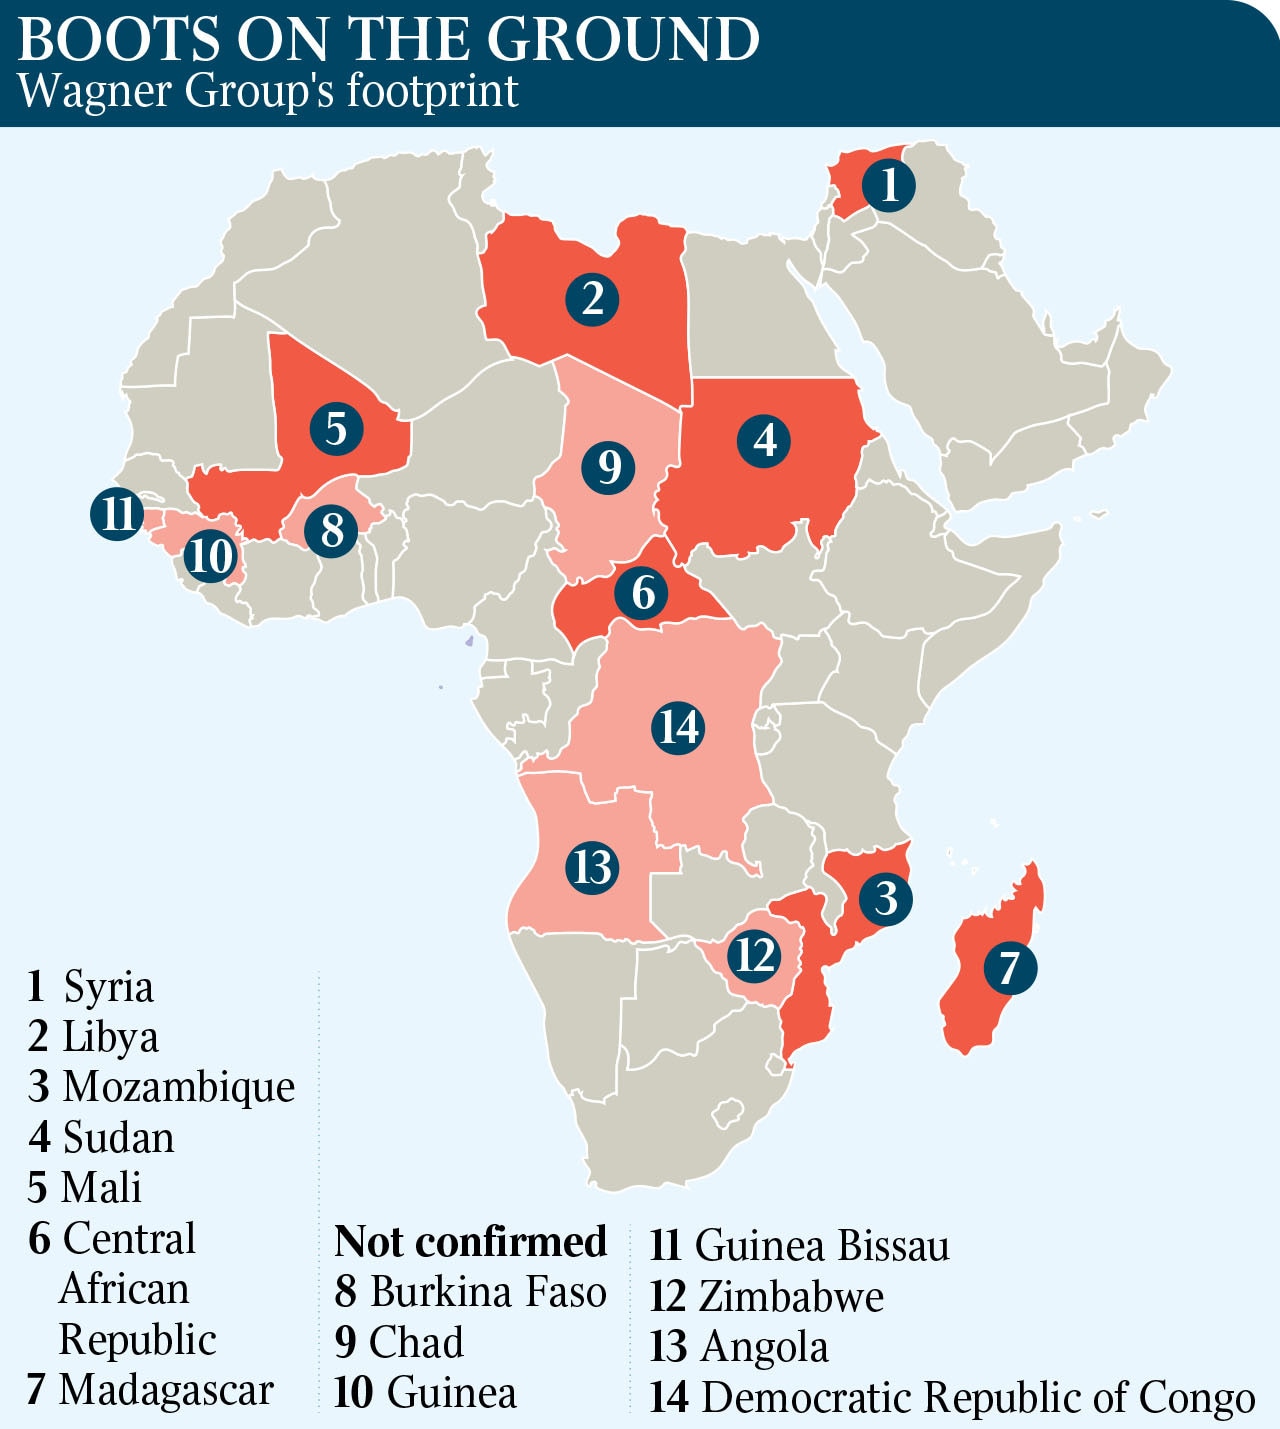 Wagner Group in Africa faces unknown future | The Australian